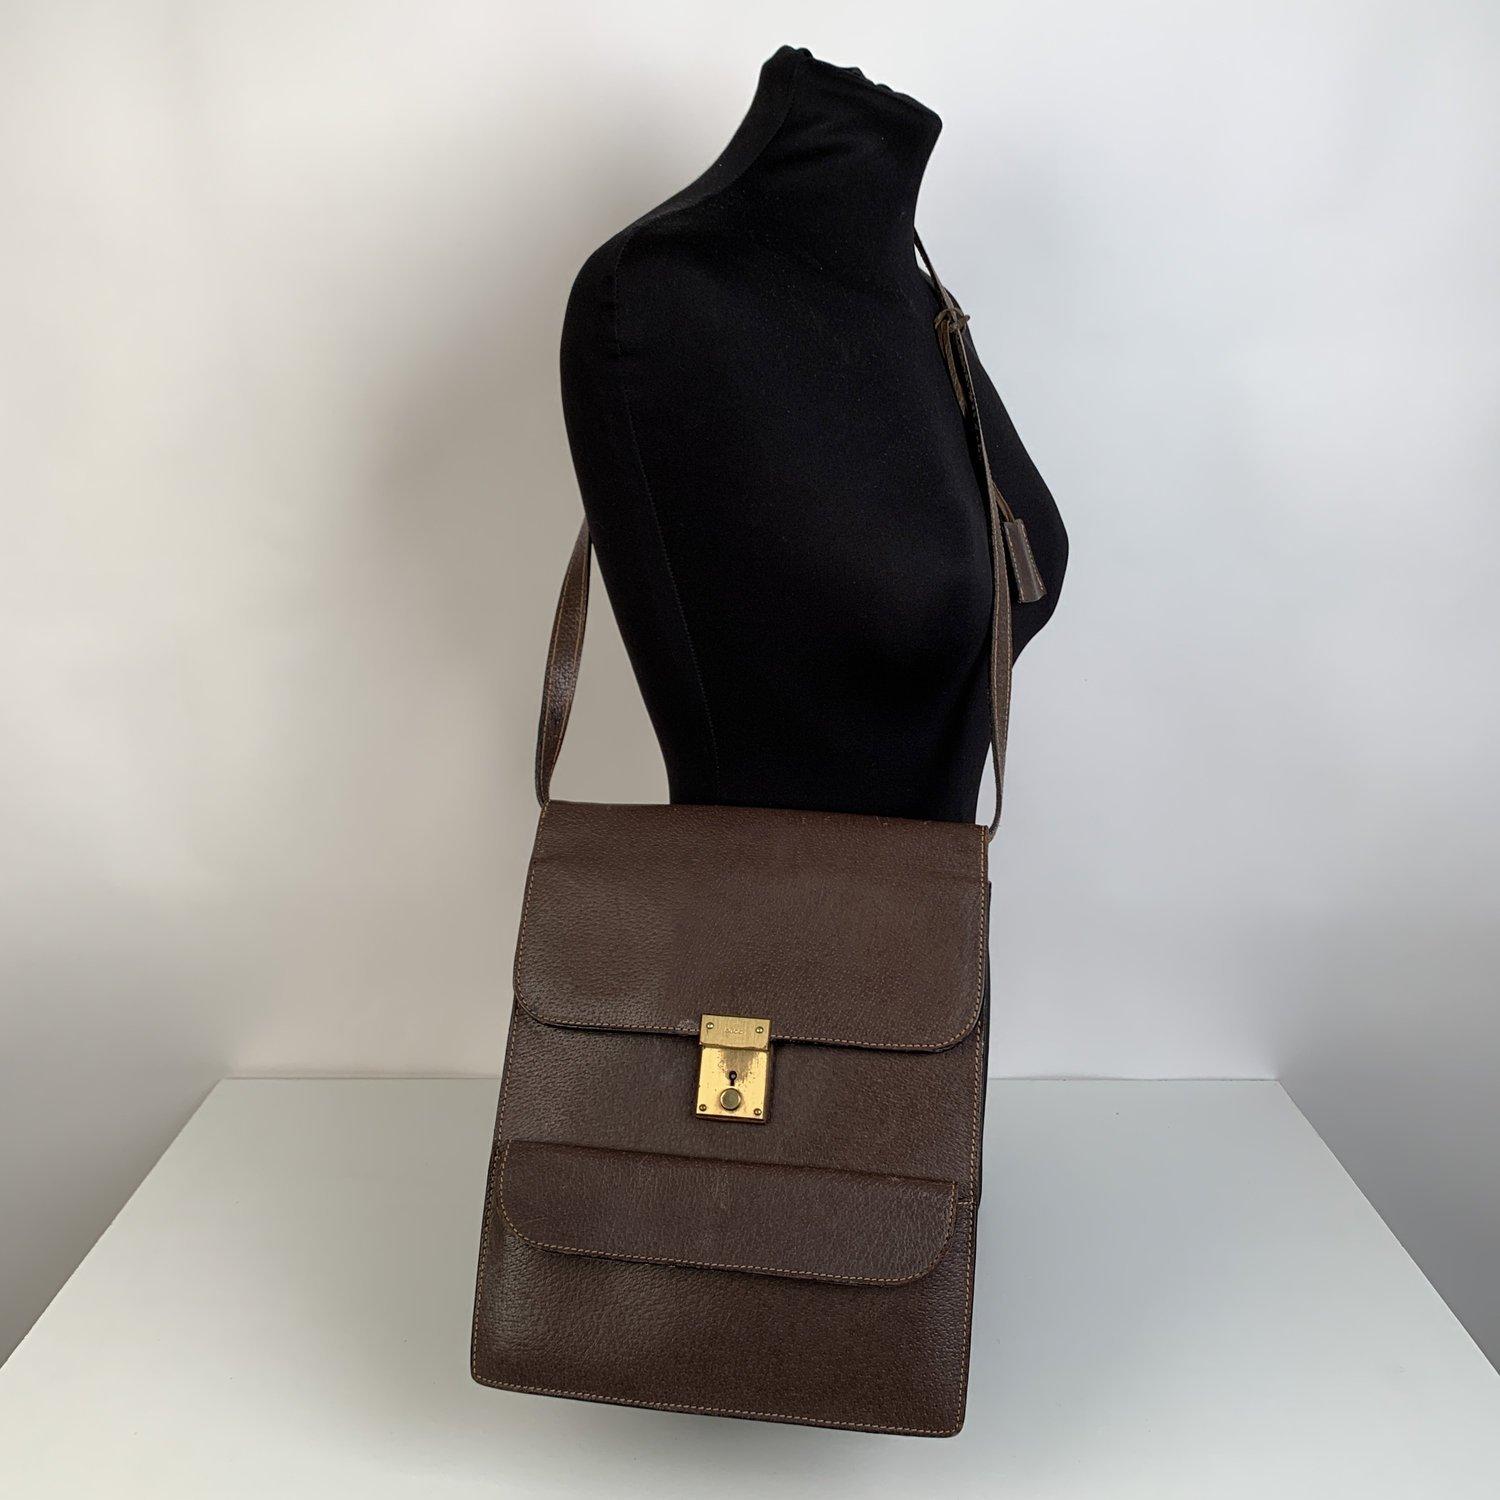 MATERIAL: Leather COLOR: Brown MODEL: Shoulder Bag GENDER: Women, Men SIZE: Medium Condition B - VERY GOOD Some scratches and creases on leather due to normal use (especially on the back), some superficial scratches on the hardware on the front,